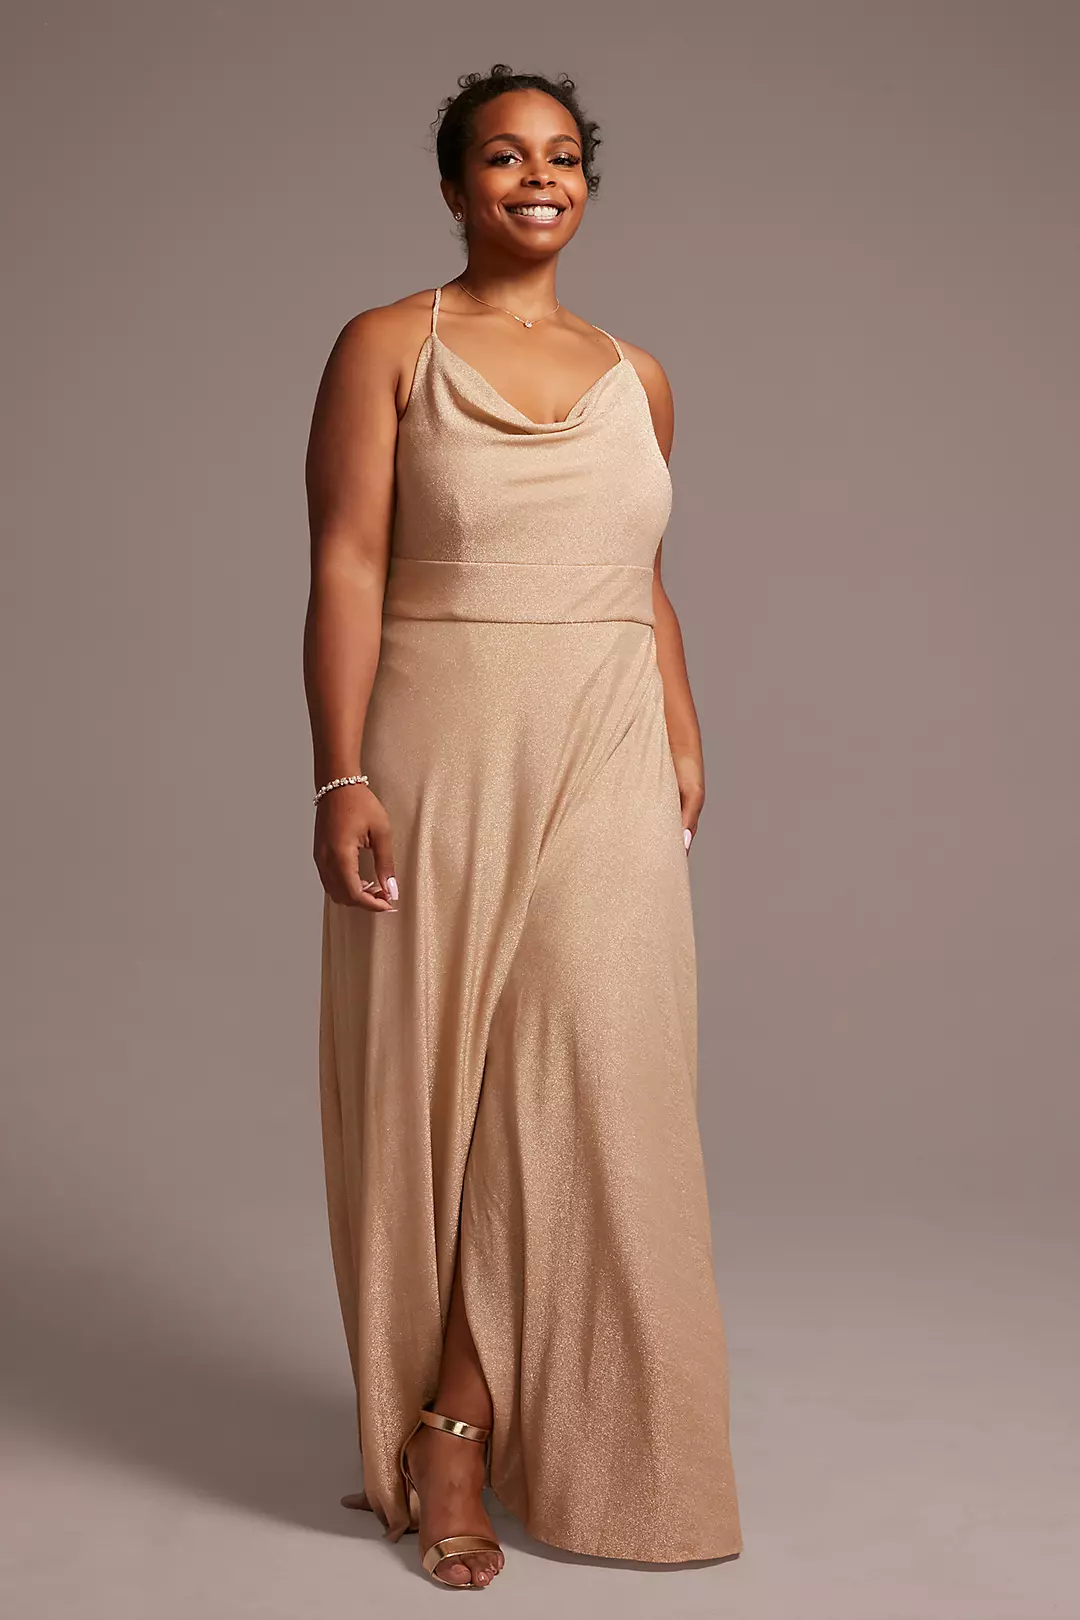 Metallic Cowl Neck Dress with Lace-Up Back Image